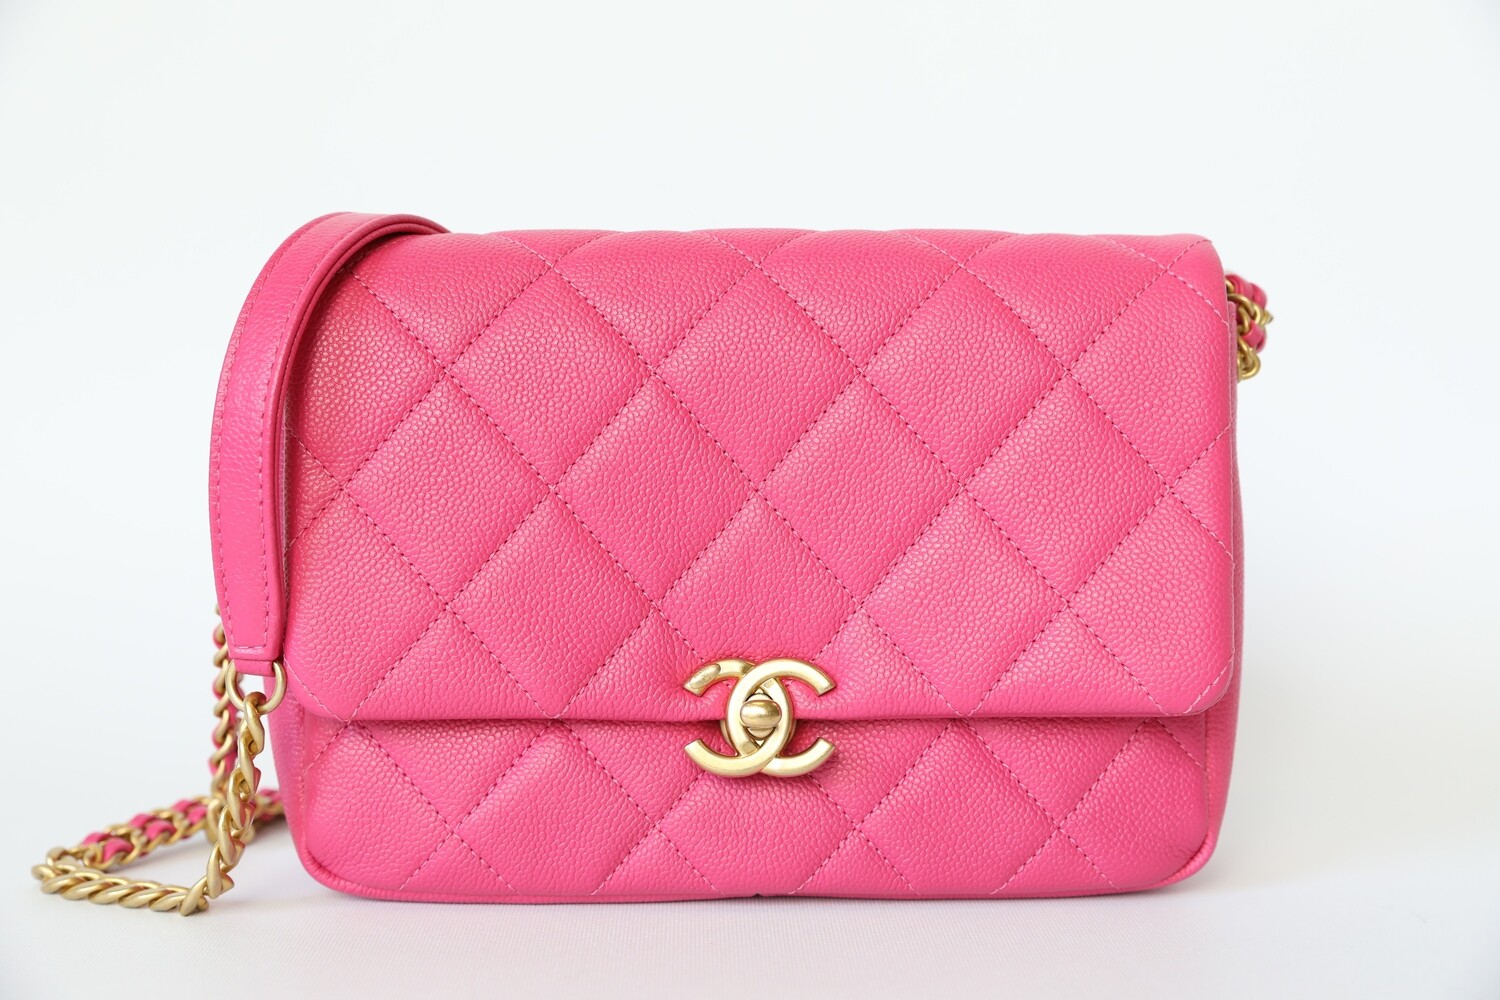 Chanel Melody Flap, Bright Pink Caviar with Gold Hardware, Preowned in Box  WA001